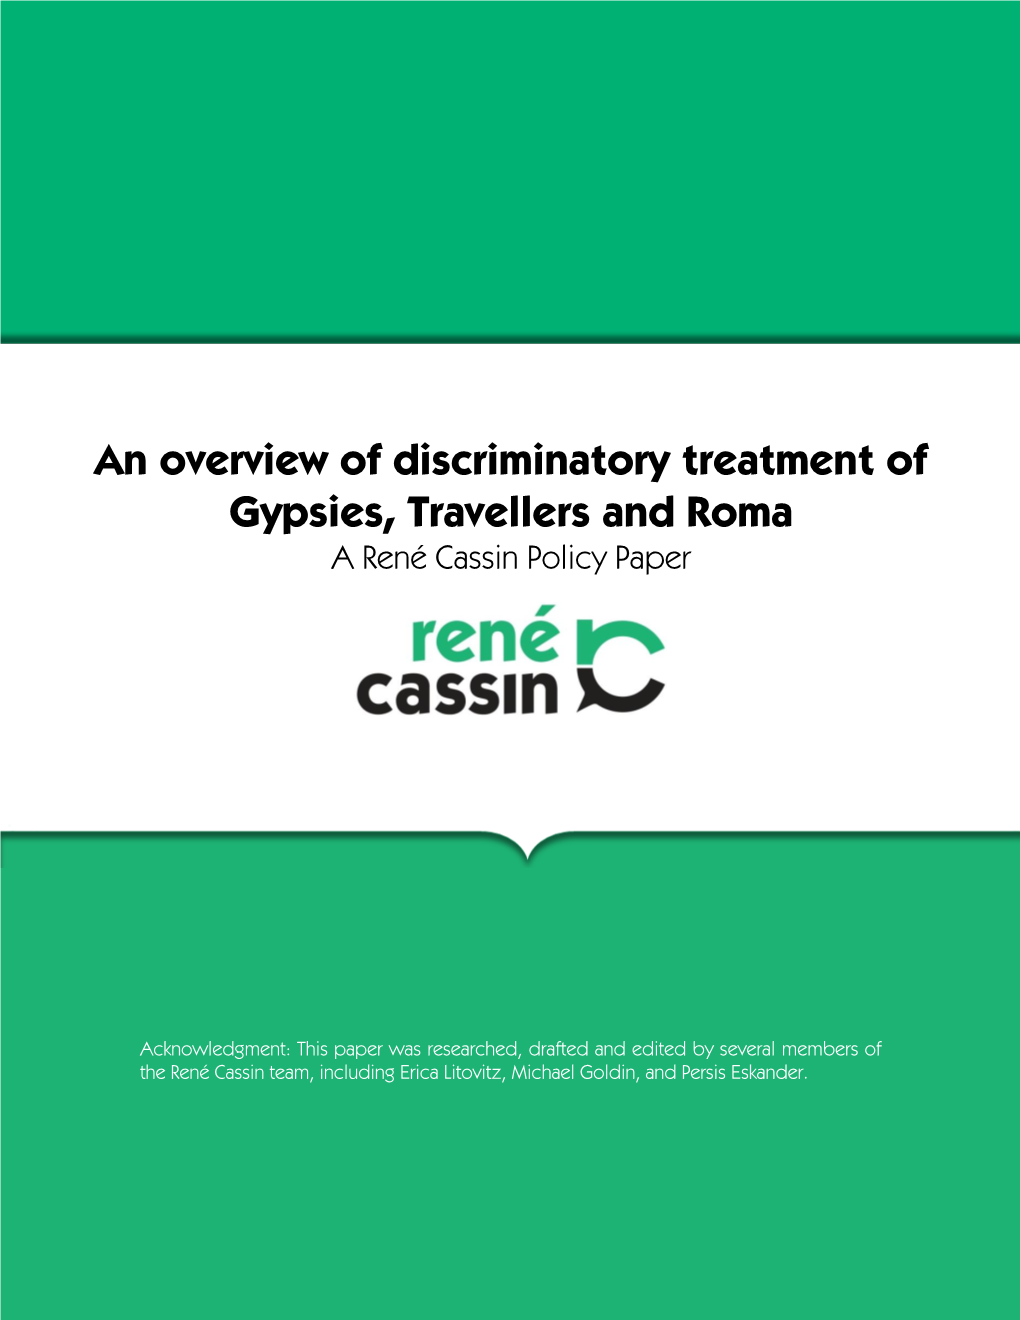 An Overview of Discriminatory Treatment of Gypsies, Travellers and Roma a René Cassin Policy Paper